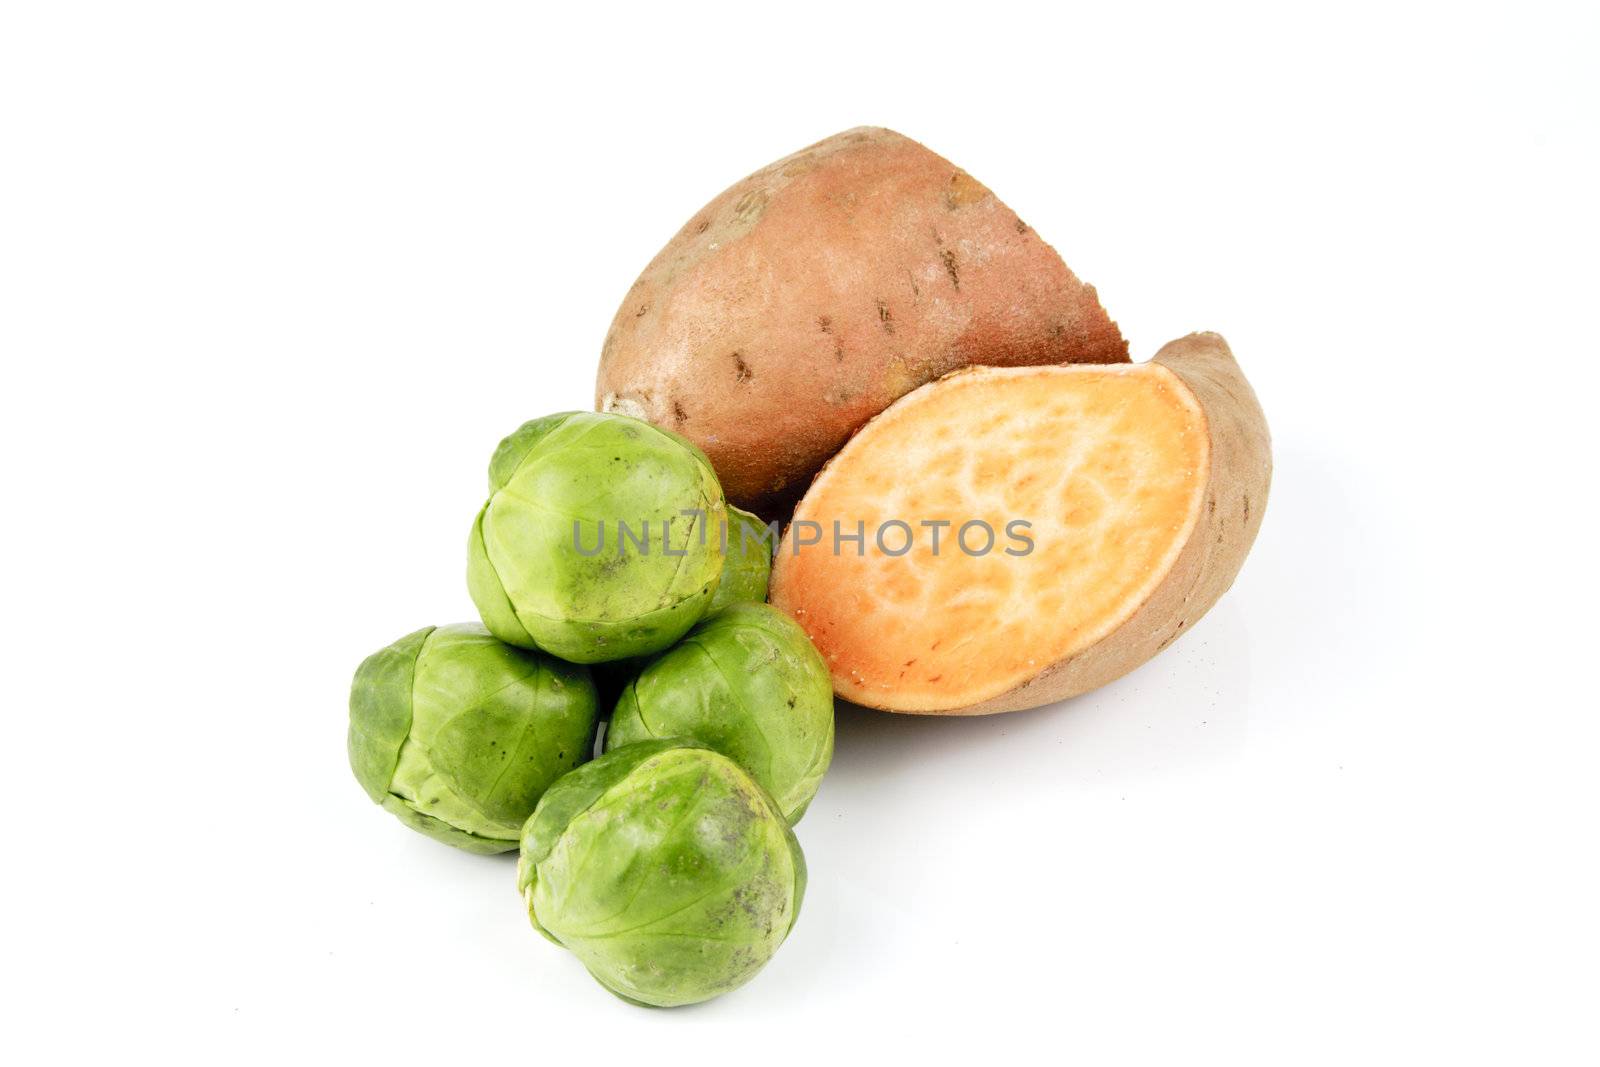 Sweet Potato cut in half with pile of green sprouts on a reflective white background